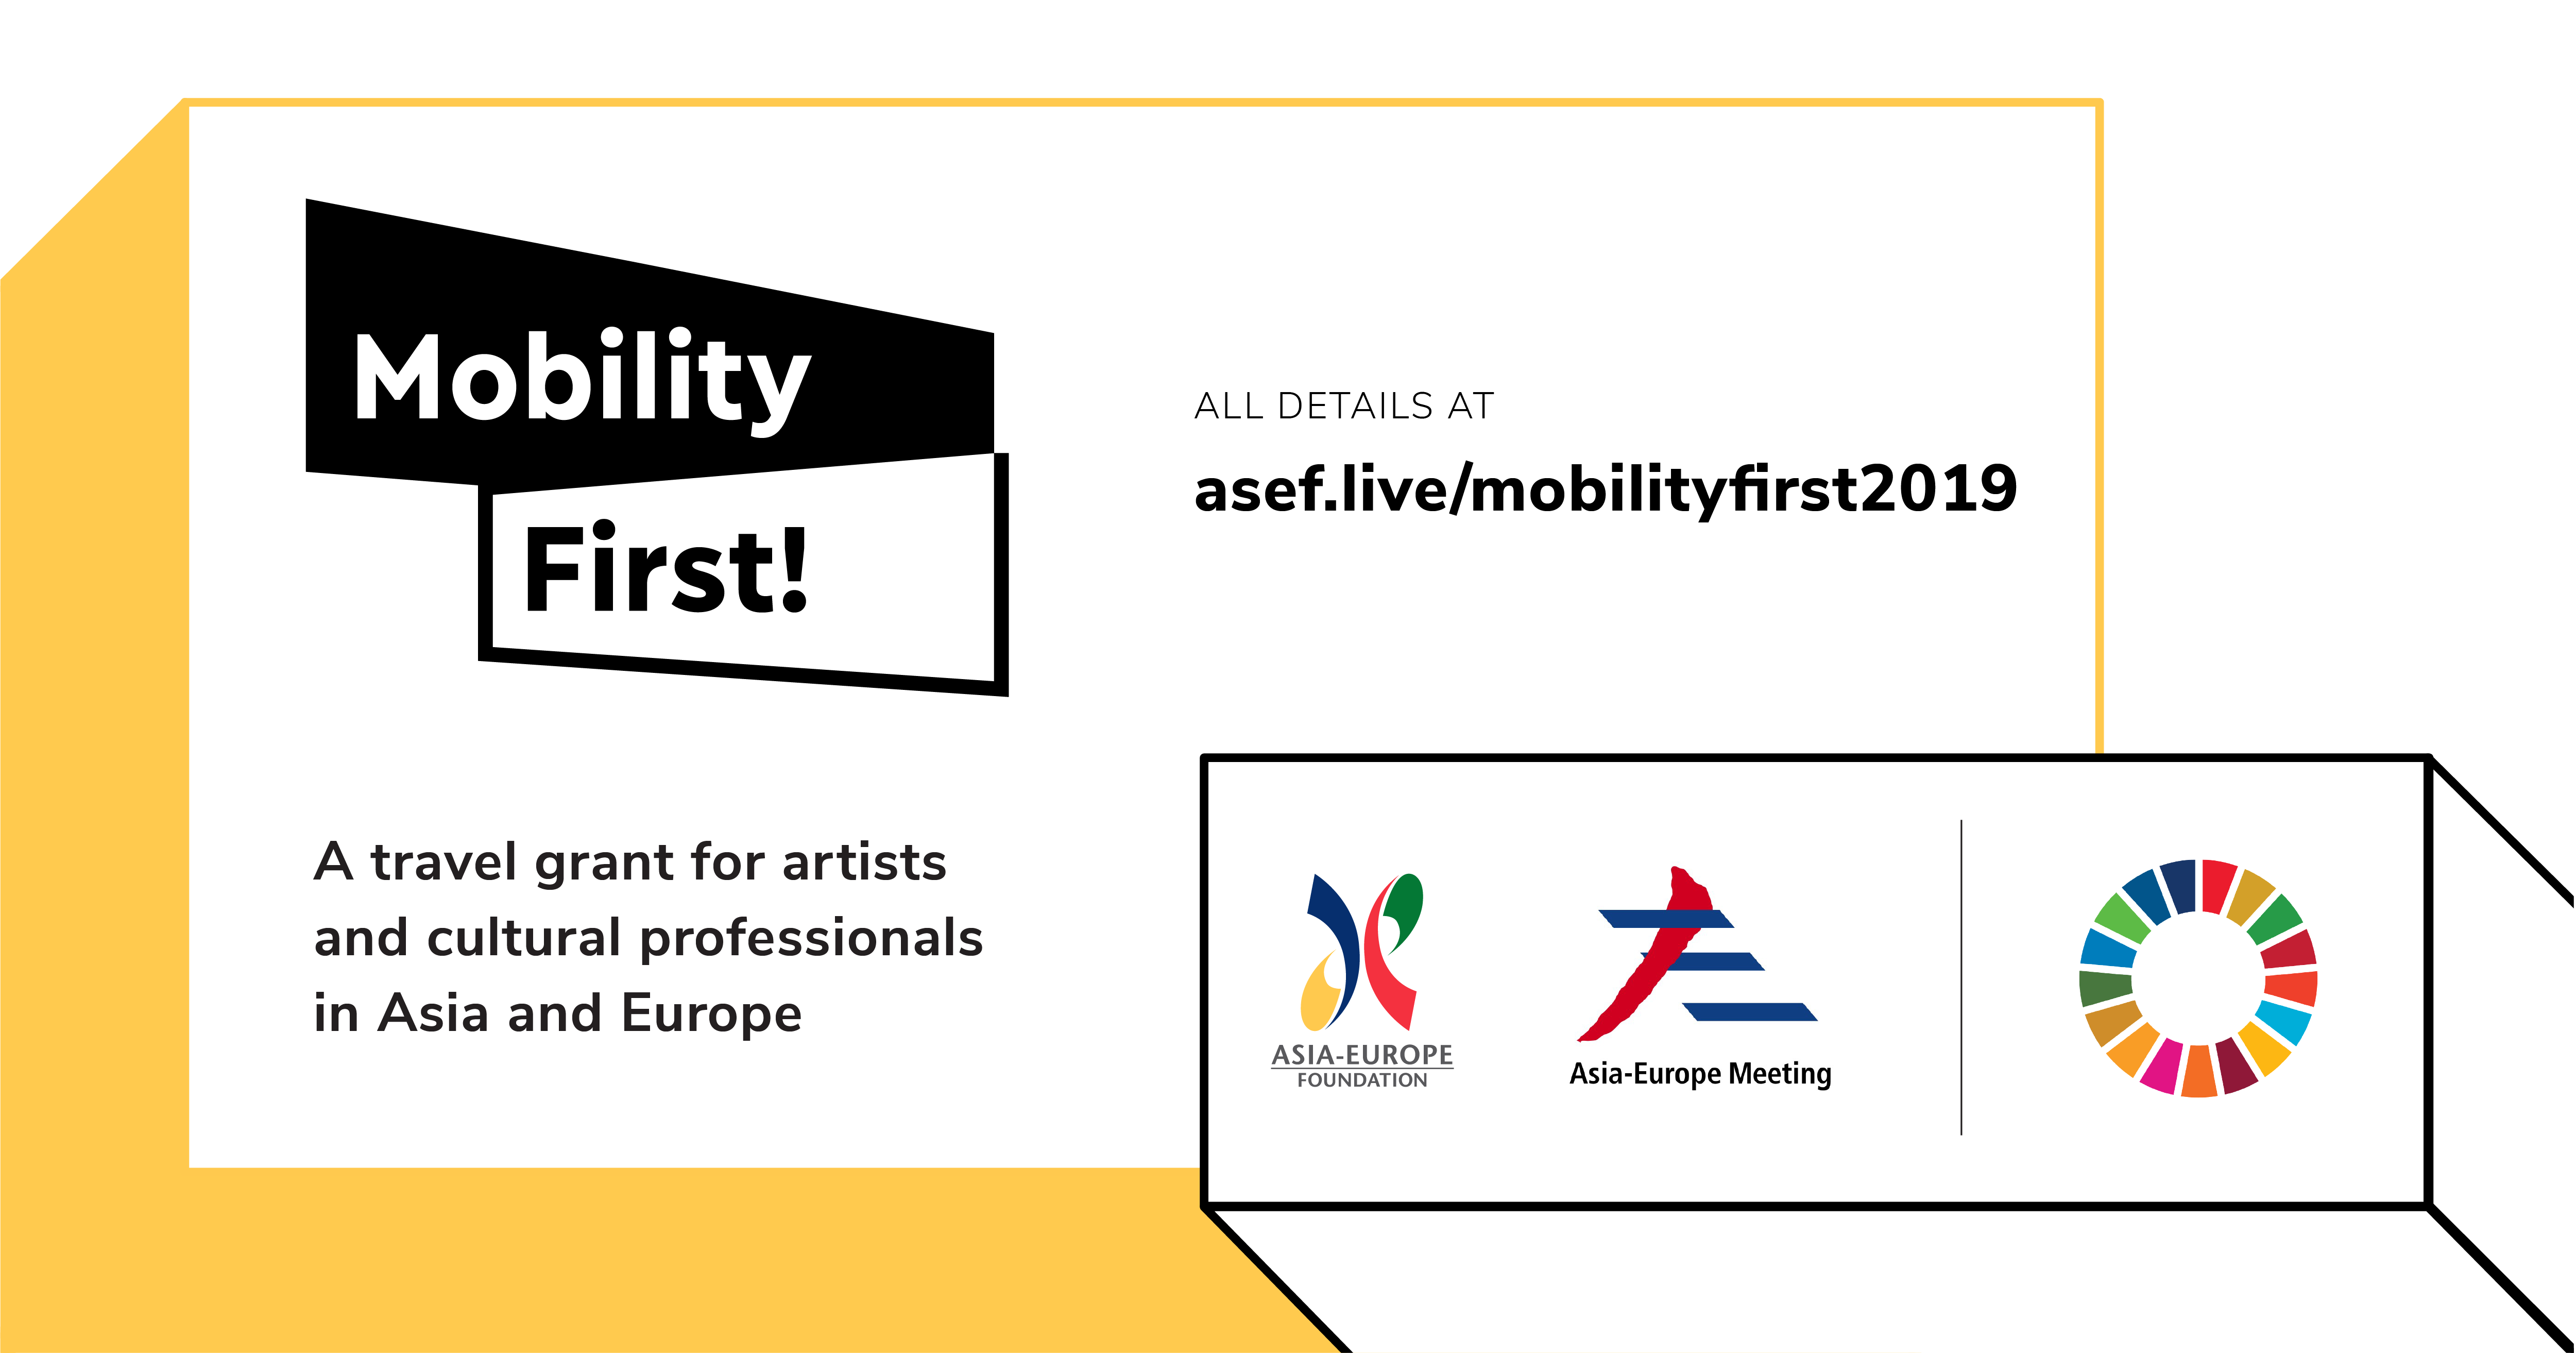 ASEF Mobility First Travel Grant 2019 for Artists & Cultural Professionals